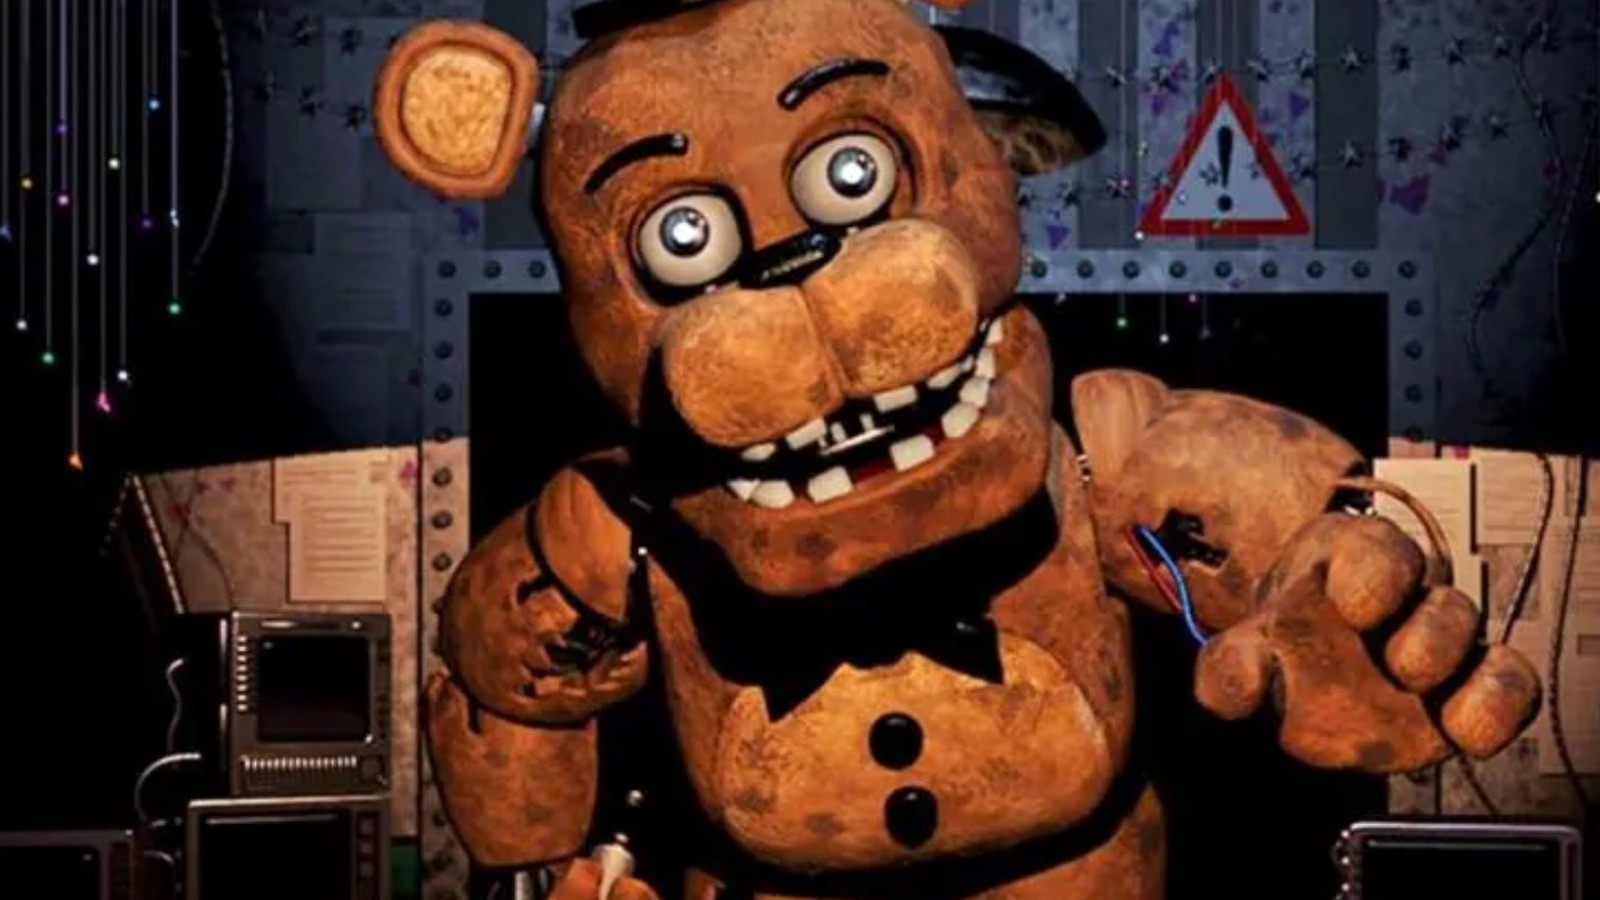 LORE - Five Nights At Freddy's 4 Lore in a Minute! 